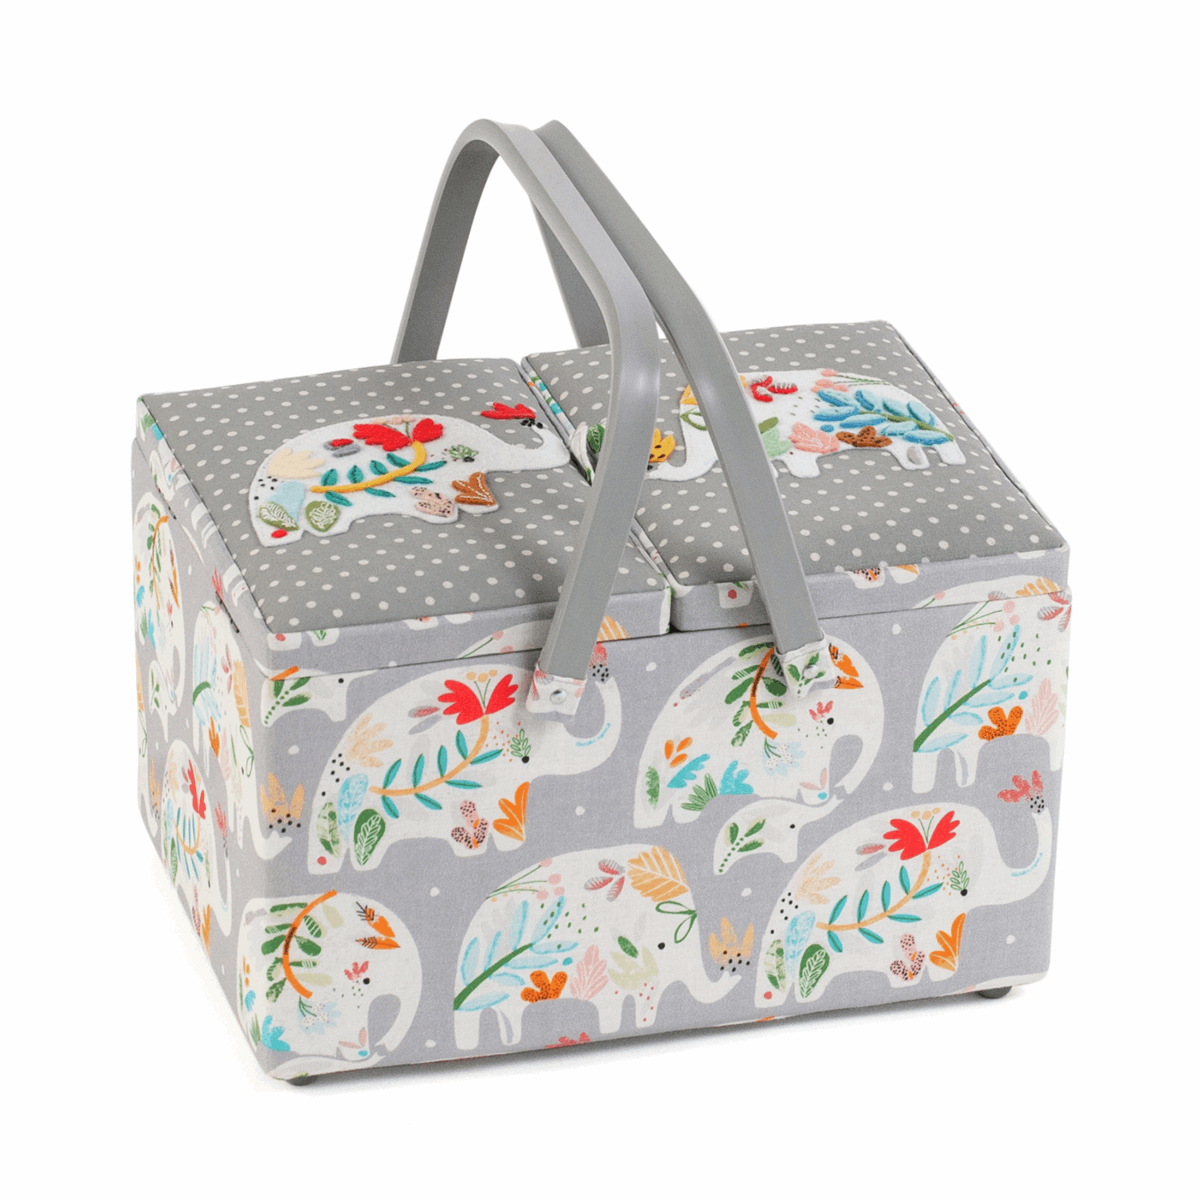 Elephants Twin-Lidded Sewing Box with Appliqué Lid - Large